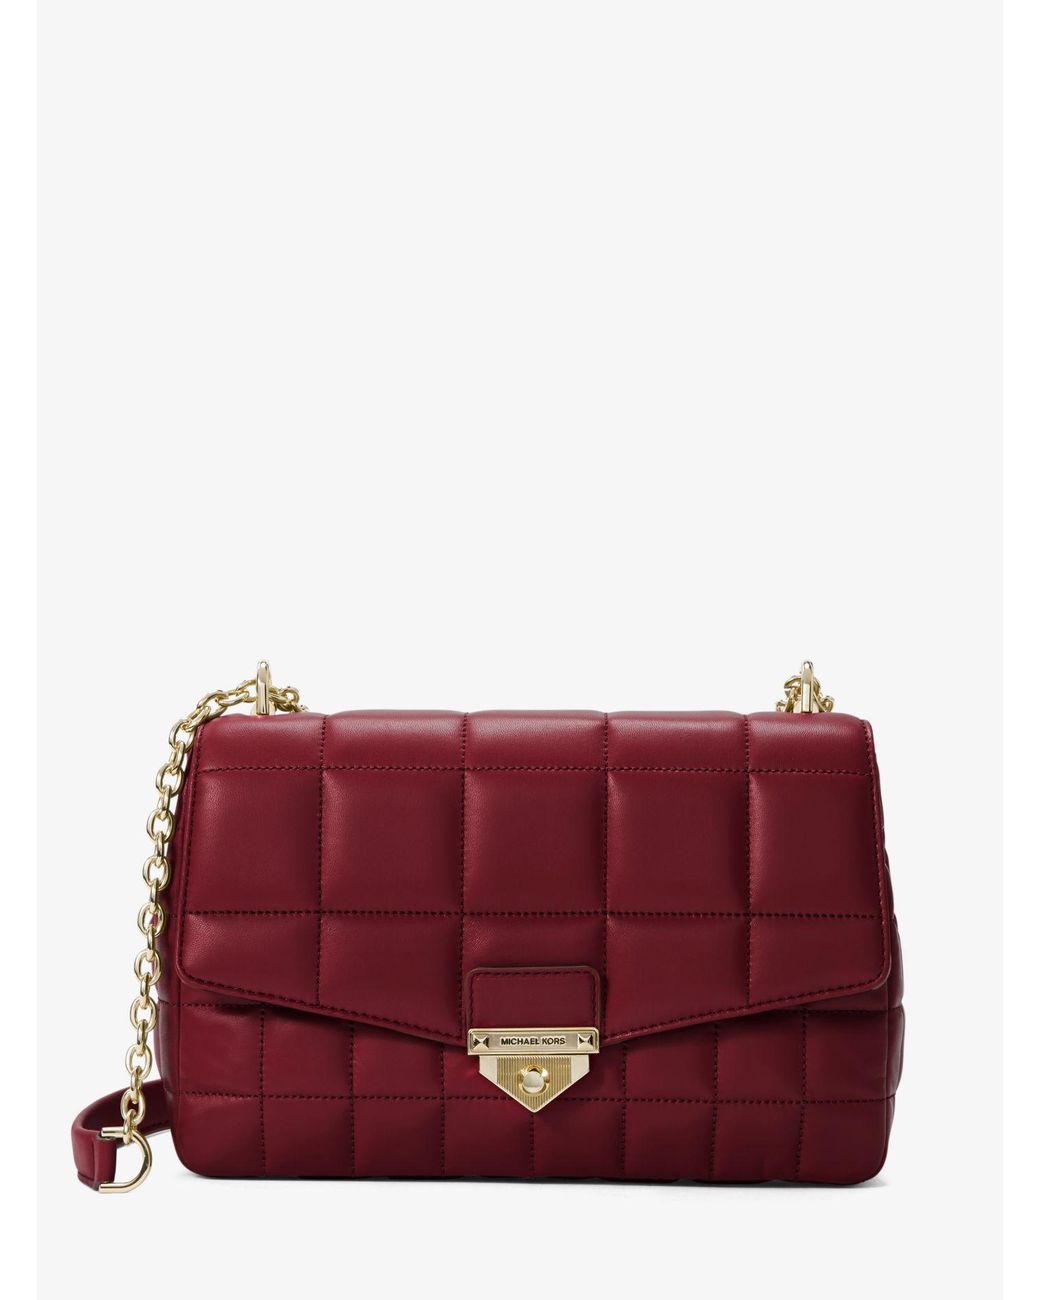 Michael Kors Soho Extra-large Quilted Leather Shoulder Bag in Red | Lyst